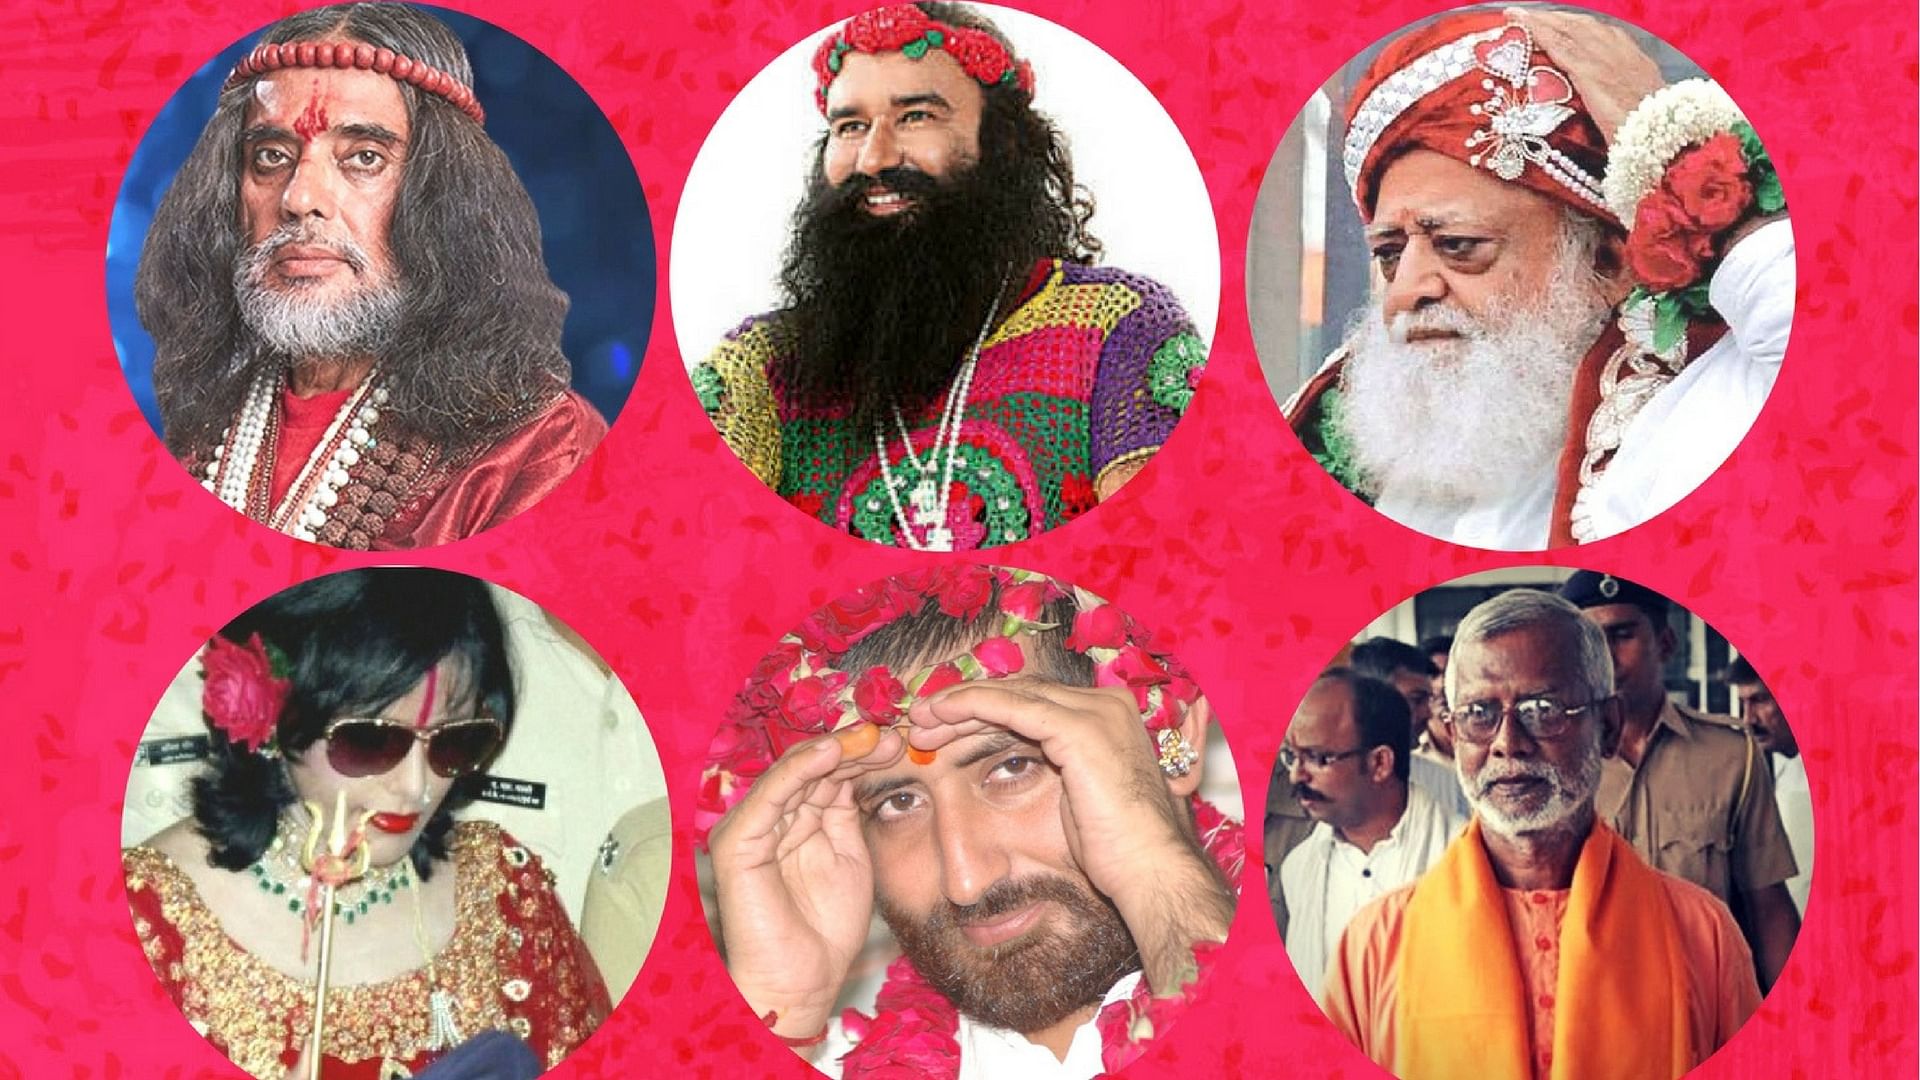 The Full List of Fake Indian Babas Who've Been Blacklisted